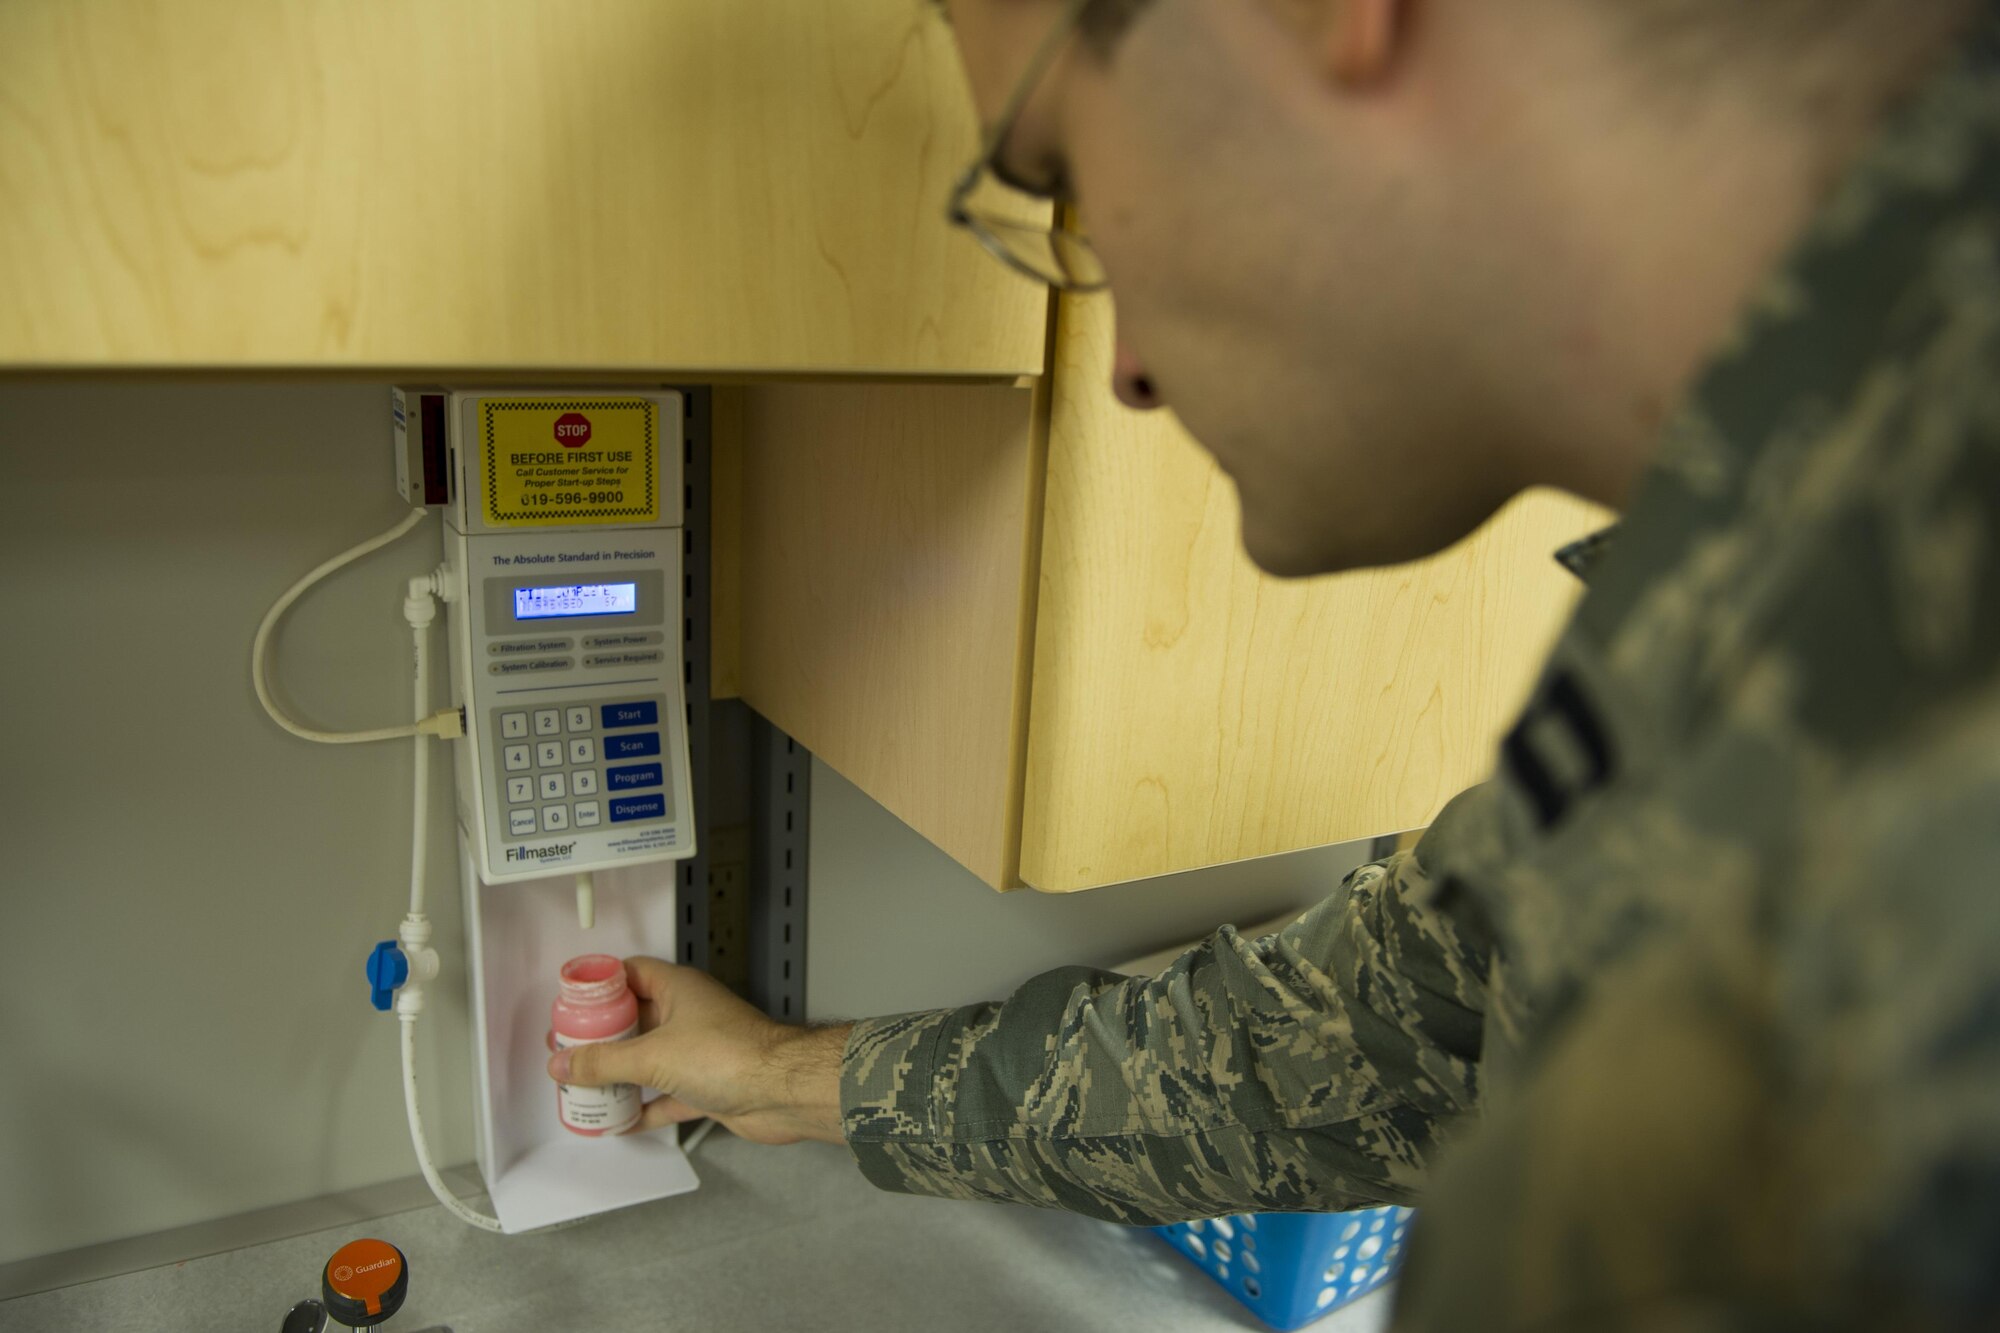 Capt. Kristofer Yaple, chief of pharmacy services for the 1st Special Operations Medical Support Squadron, mixes water with powdered amoxicillin for a prescription at Hurlburt Field, Fla., Jan. 10, 2017. Amoxicillin is an antibiotic that is used to treat different types of bacterial infections. (U.S. Air Force photo by Airman 1st Class Joseph Pick)